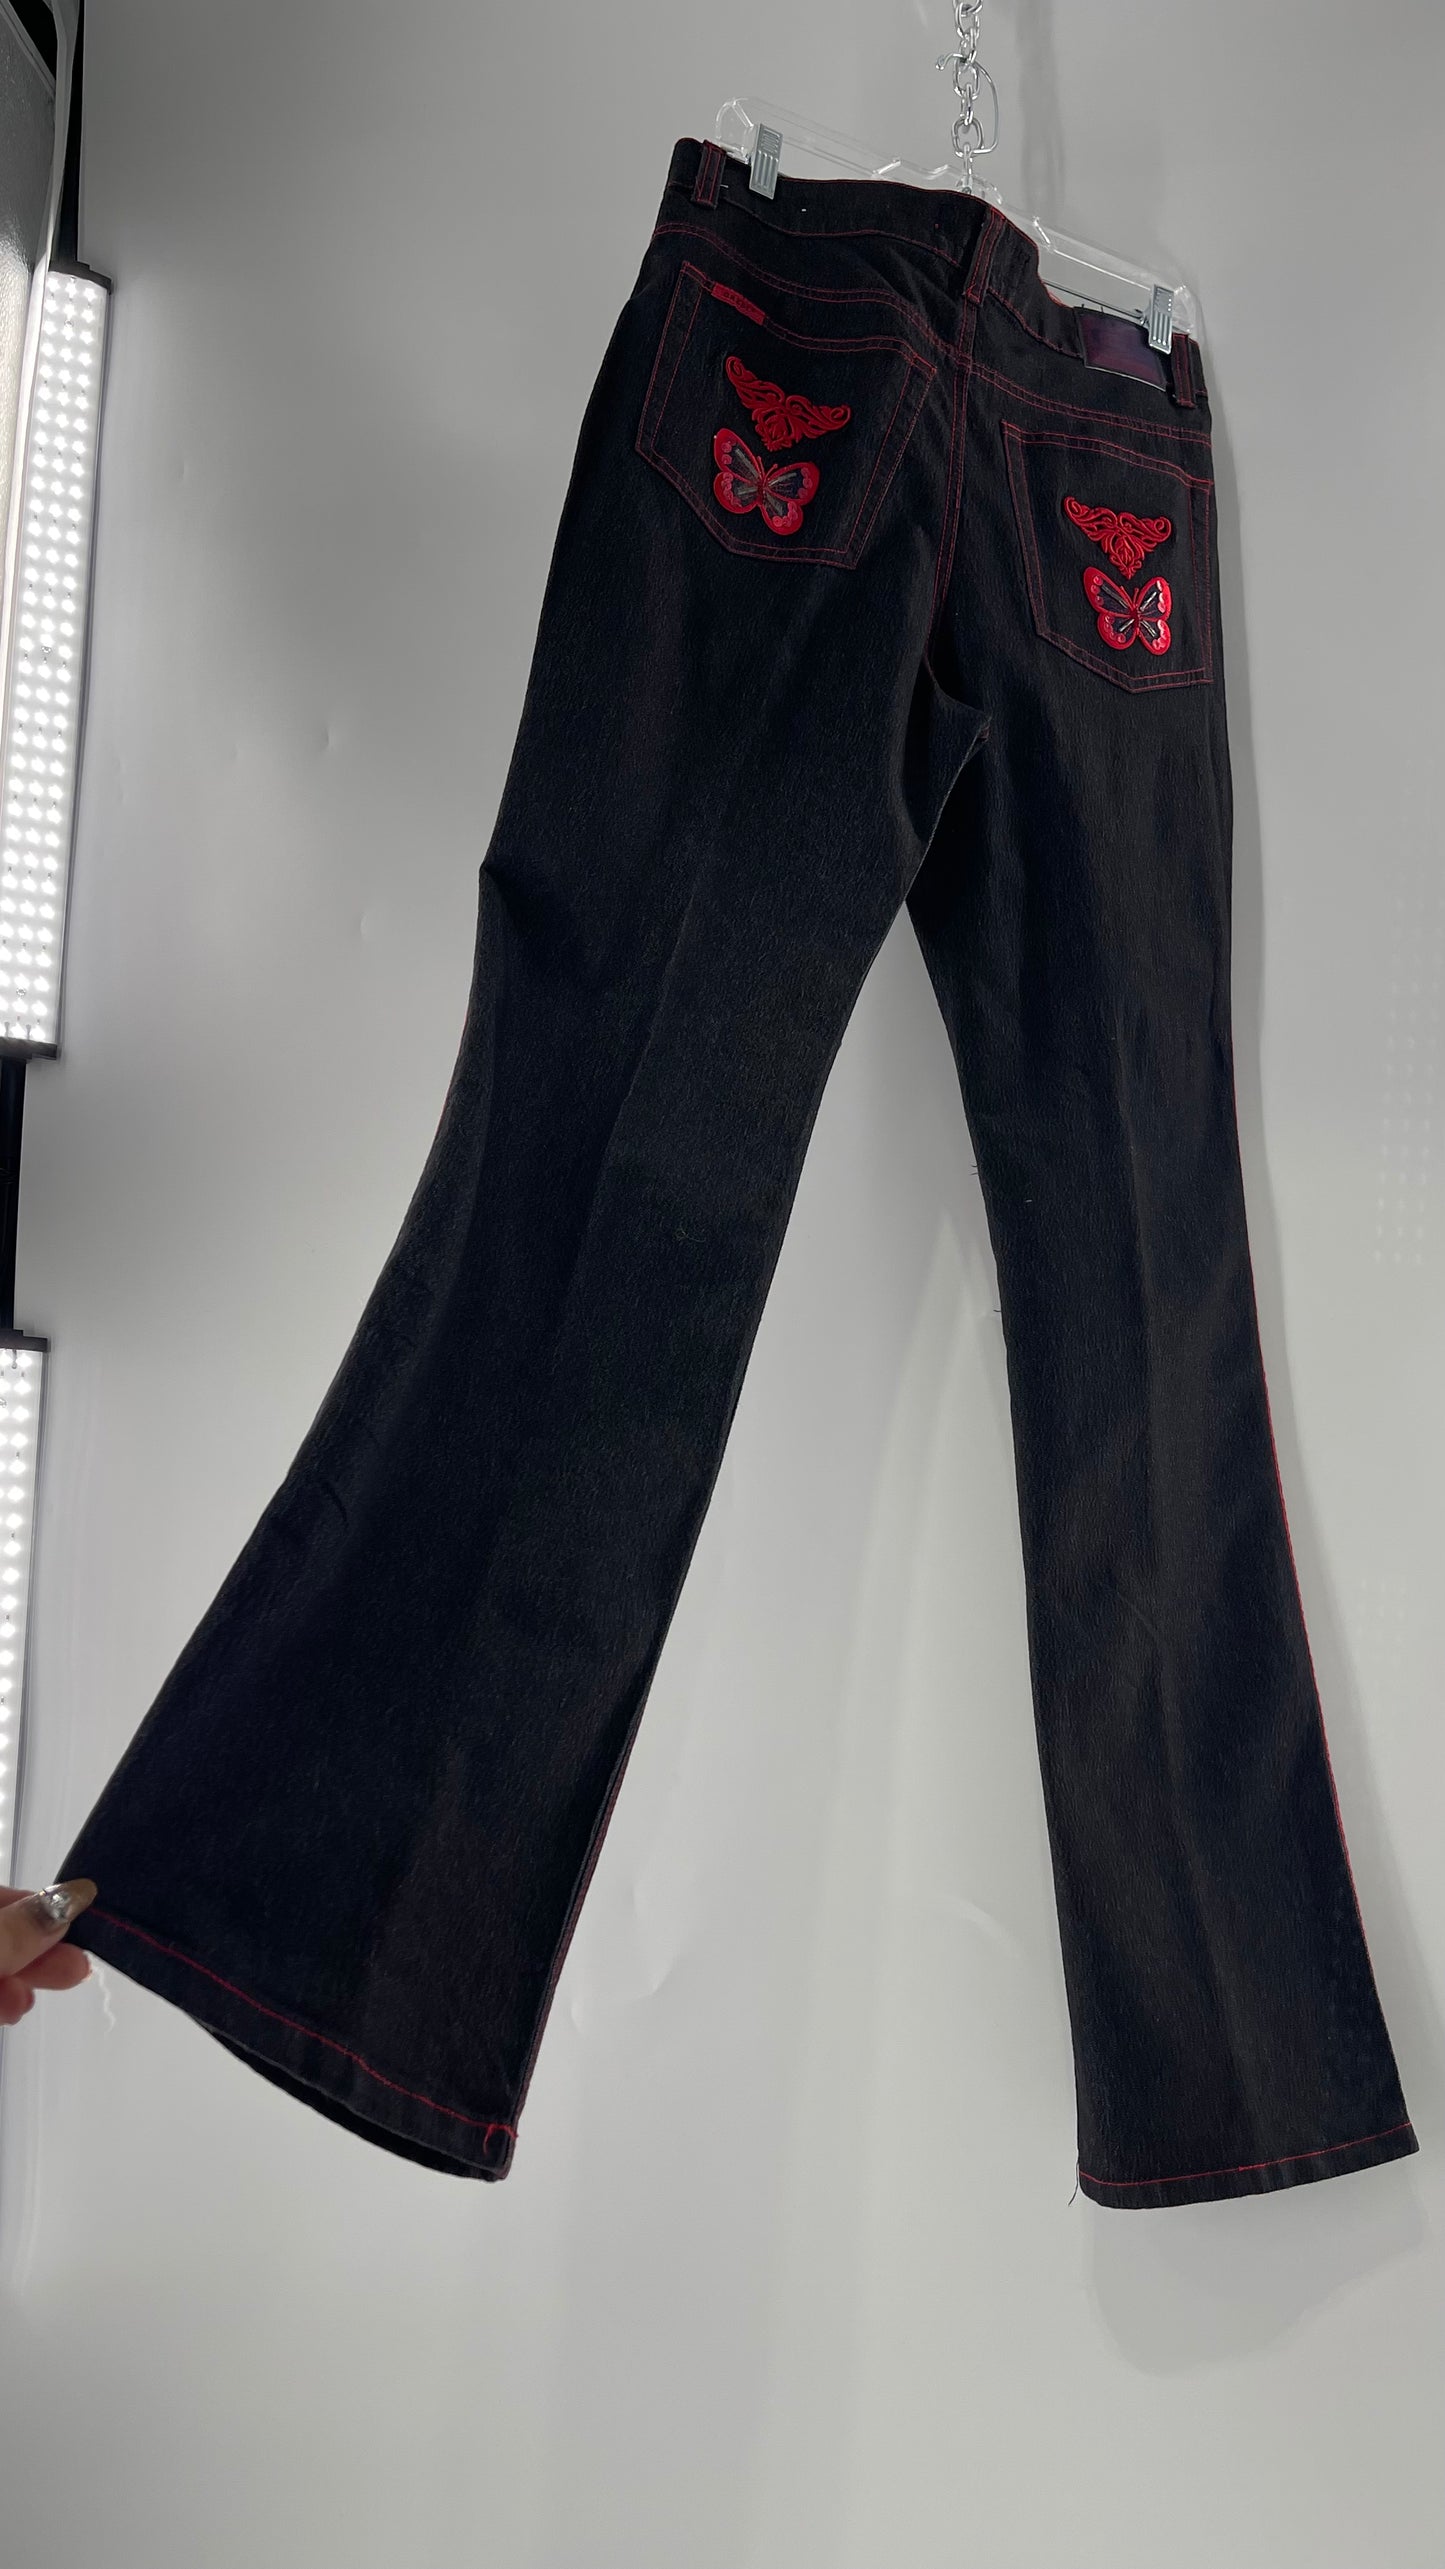 Rare Vintage Black Crest Jeans with Red Contrast Stitching and Butterfly Embroidery on Thigh and Back Pockets (14)